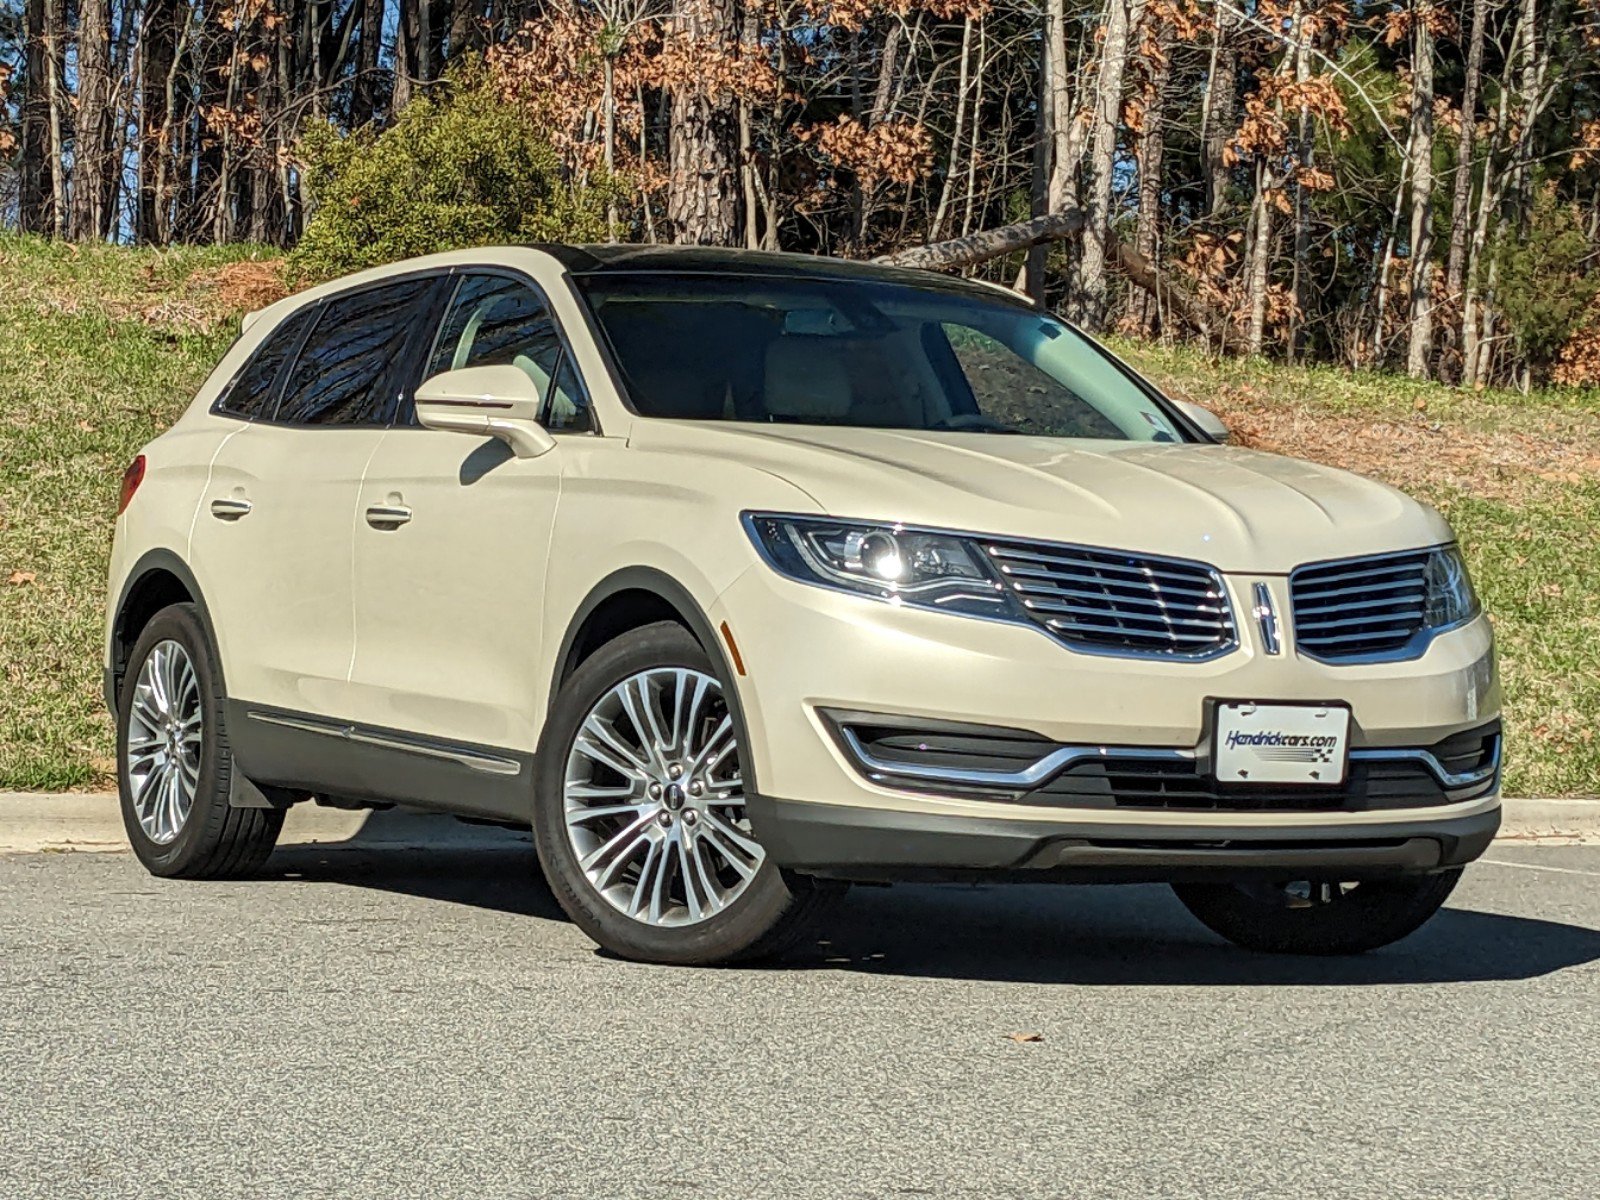 Pre-Owned 2016 Lincoln MKX Reserve SUV in Merriam #XH74371A | Hendrick  Chevrolet Shawnee Mission